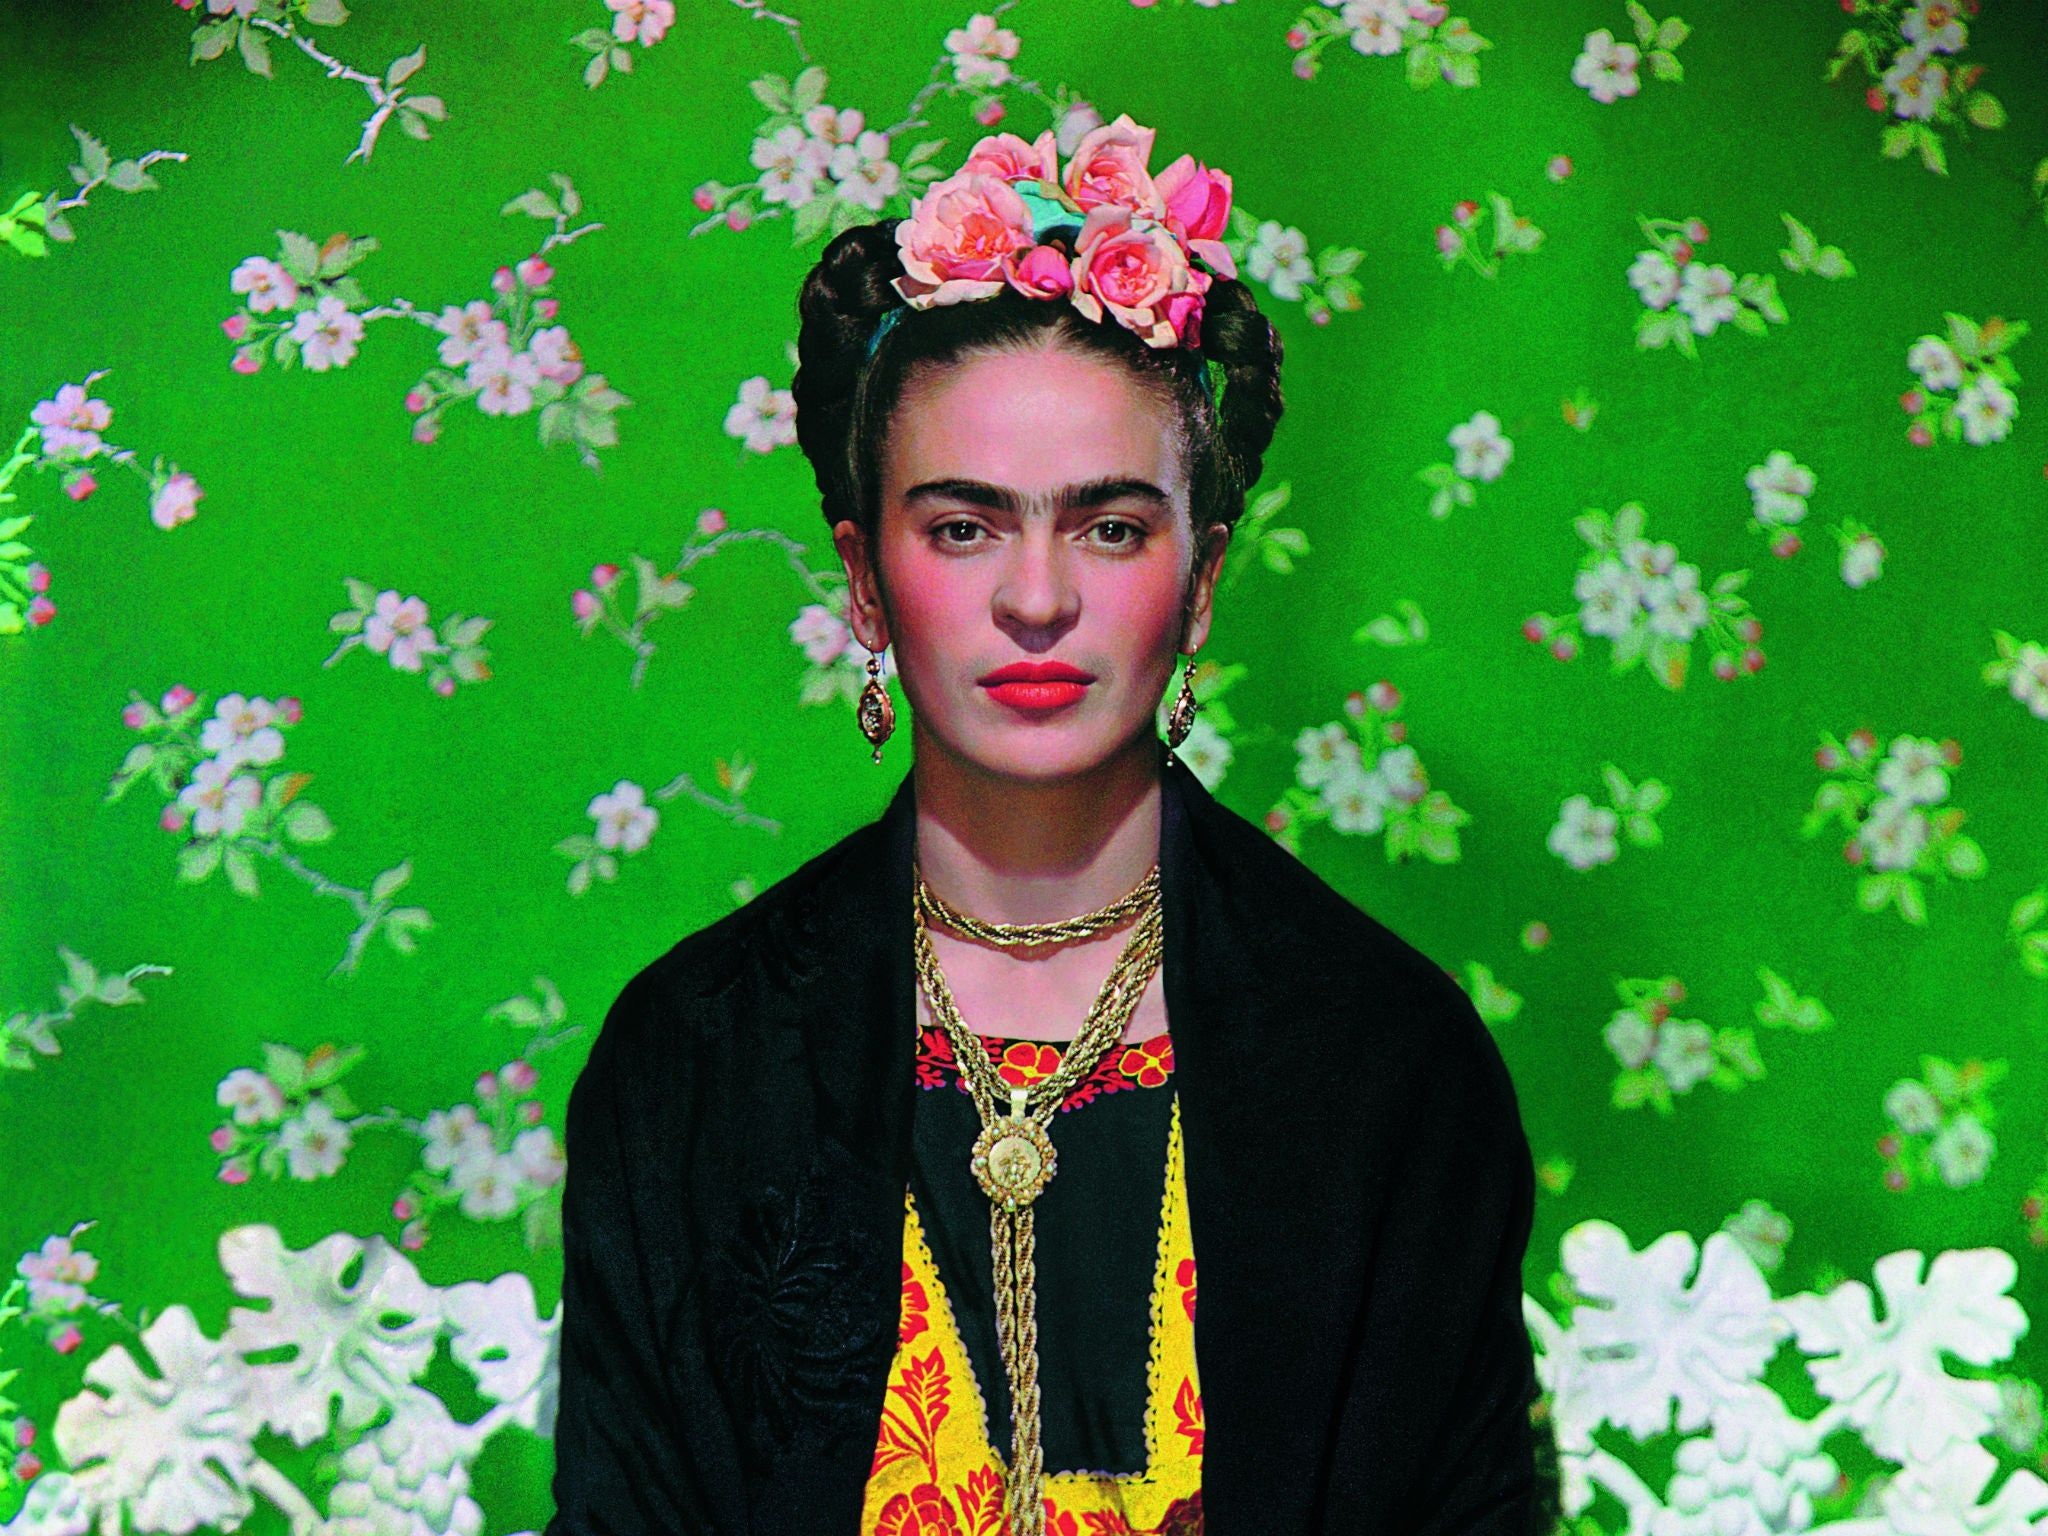 Artistic wallpapers, Frida Kahlo's passion, Colorful imagery, Creative expression, 2050x1540 HD Desktop